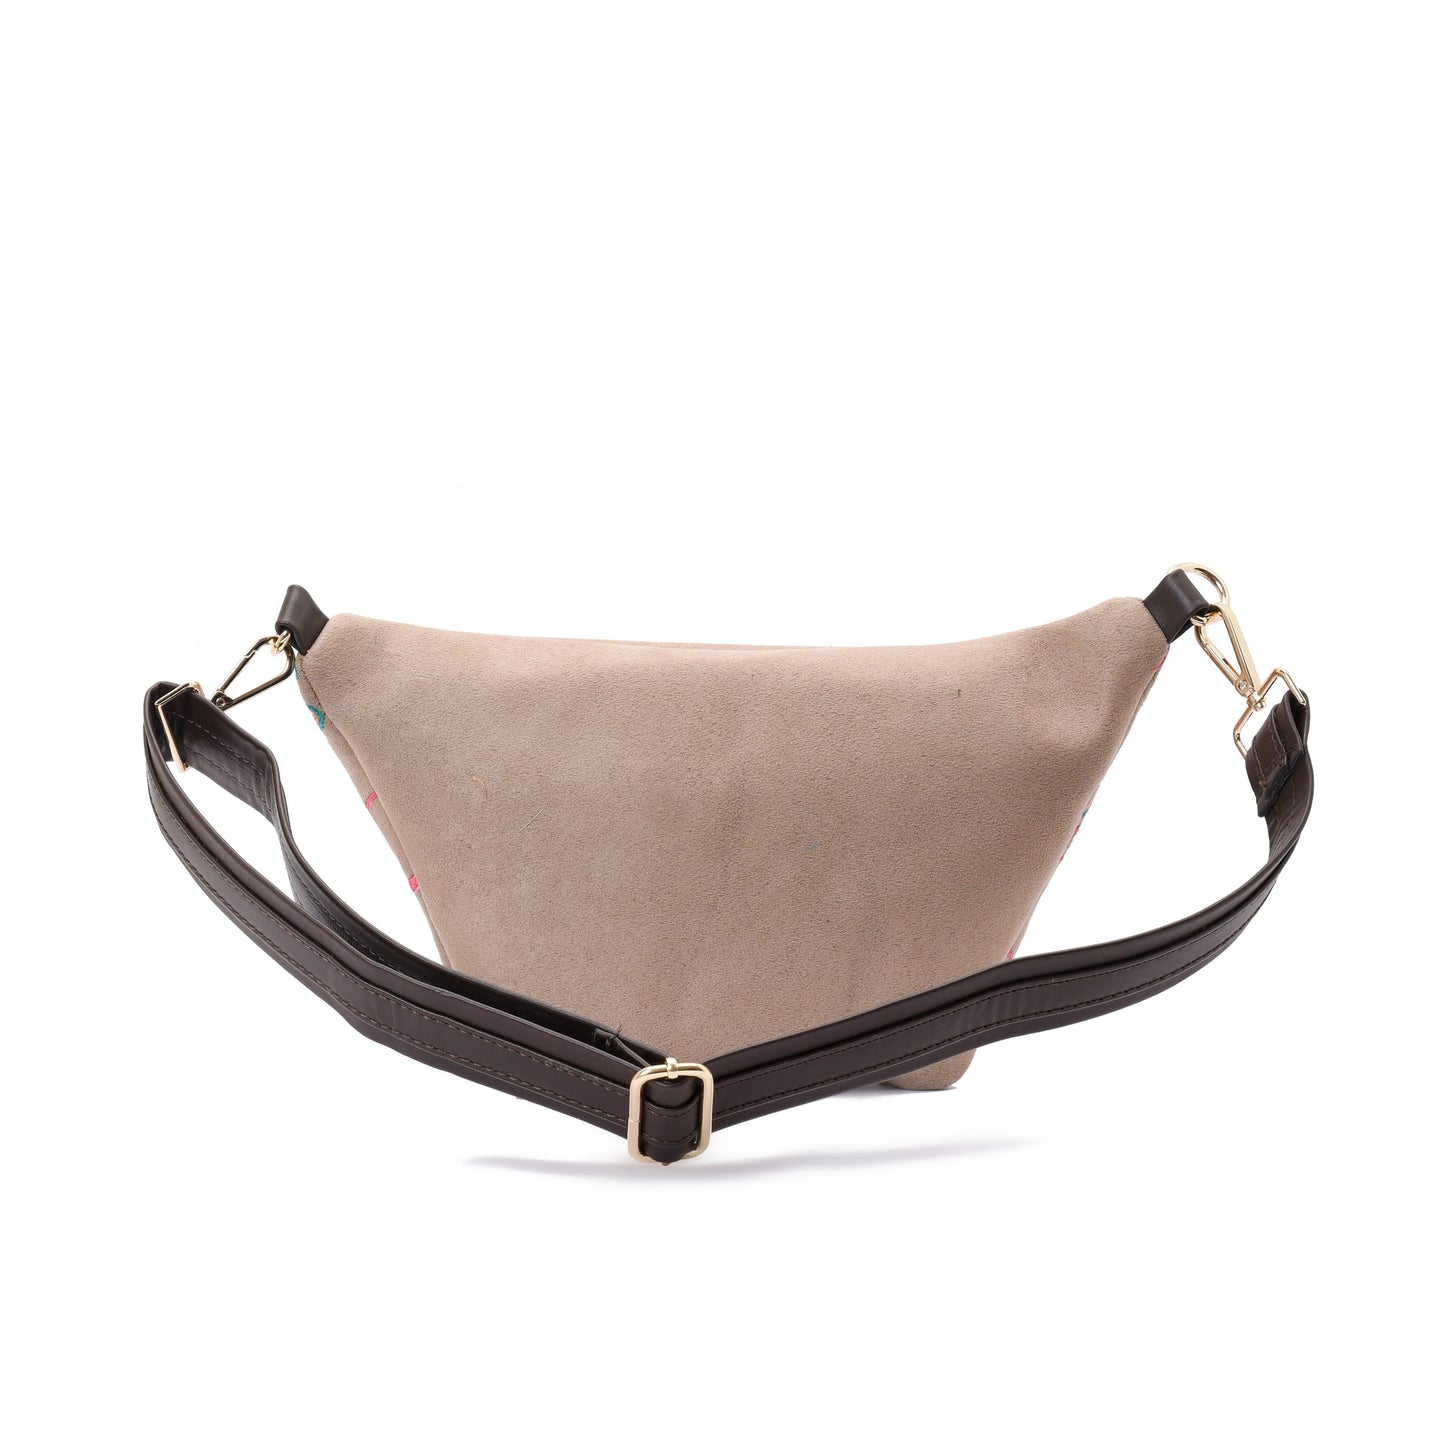 Fanny pack Indian Beige with Flowery